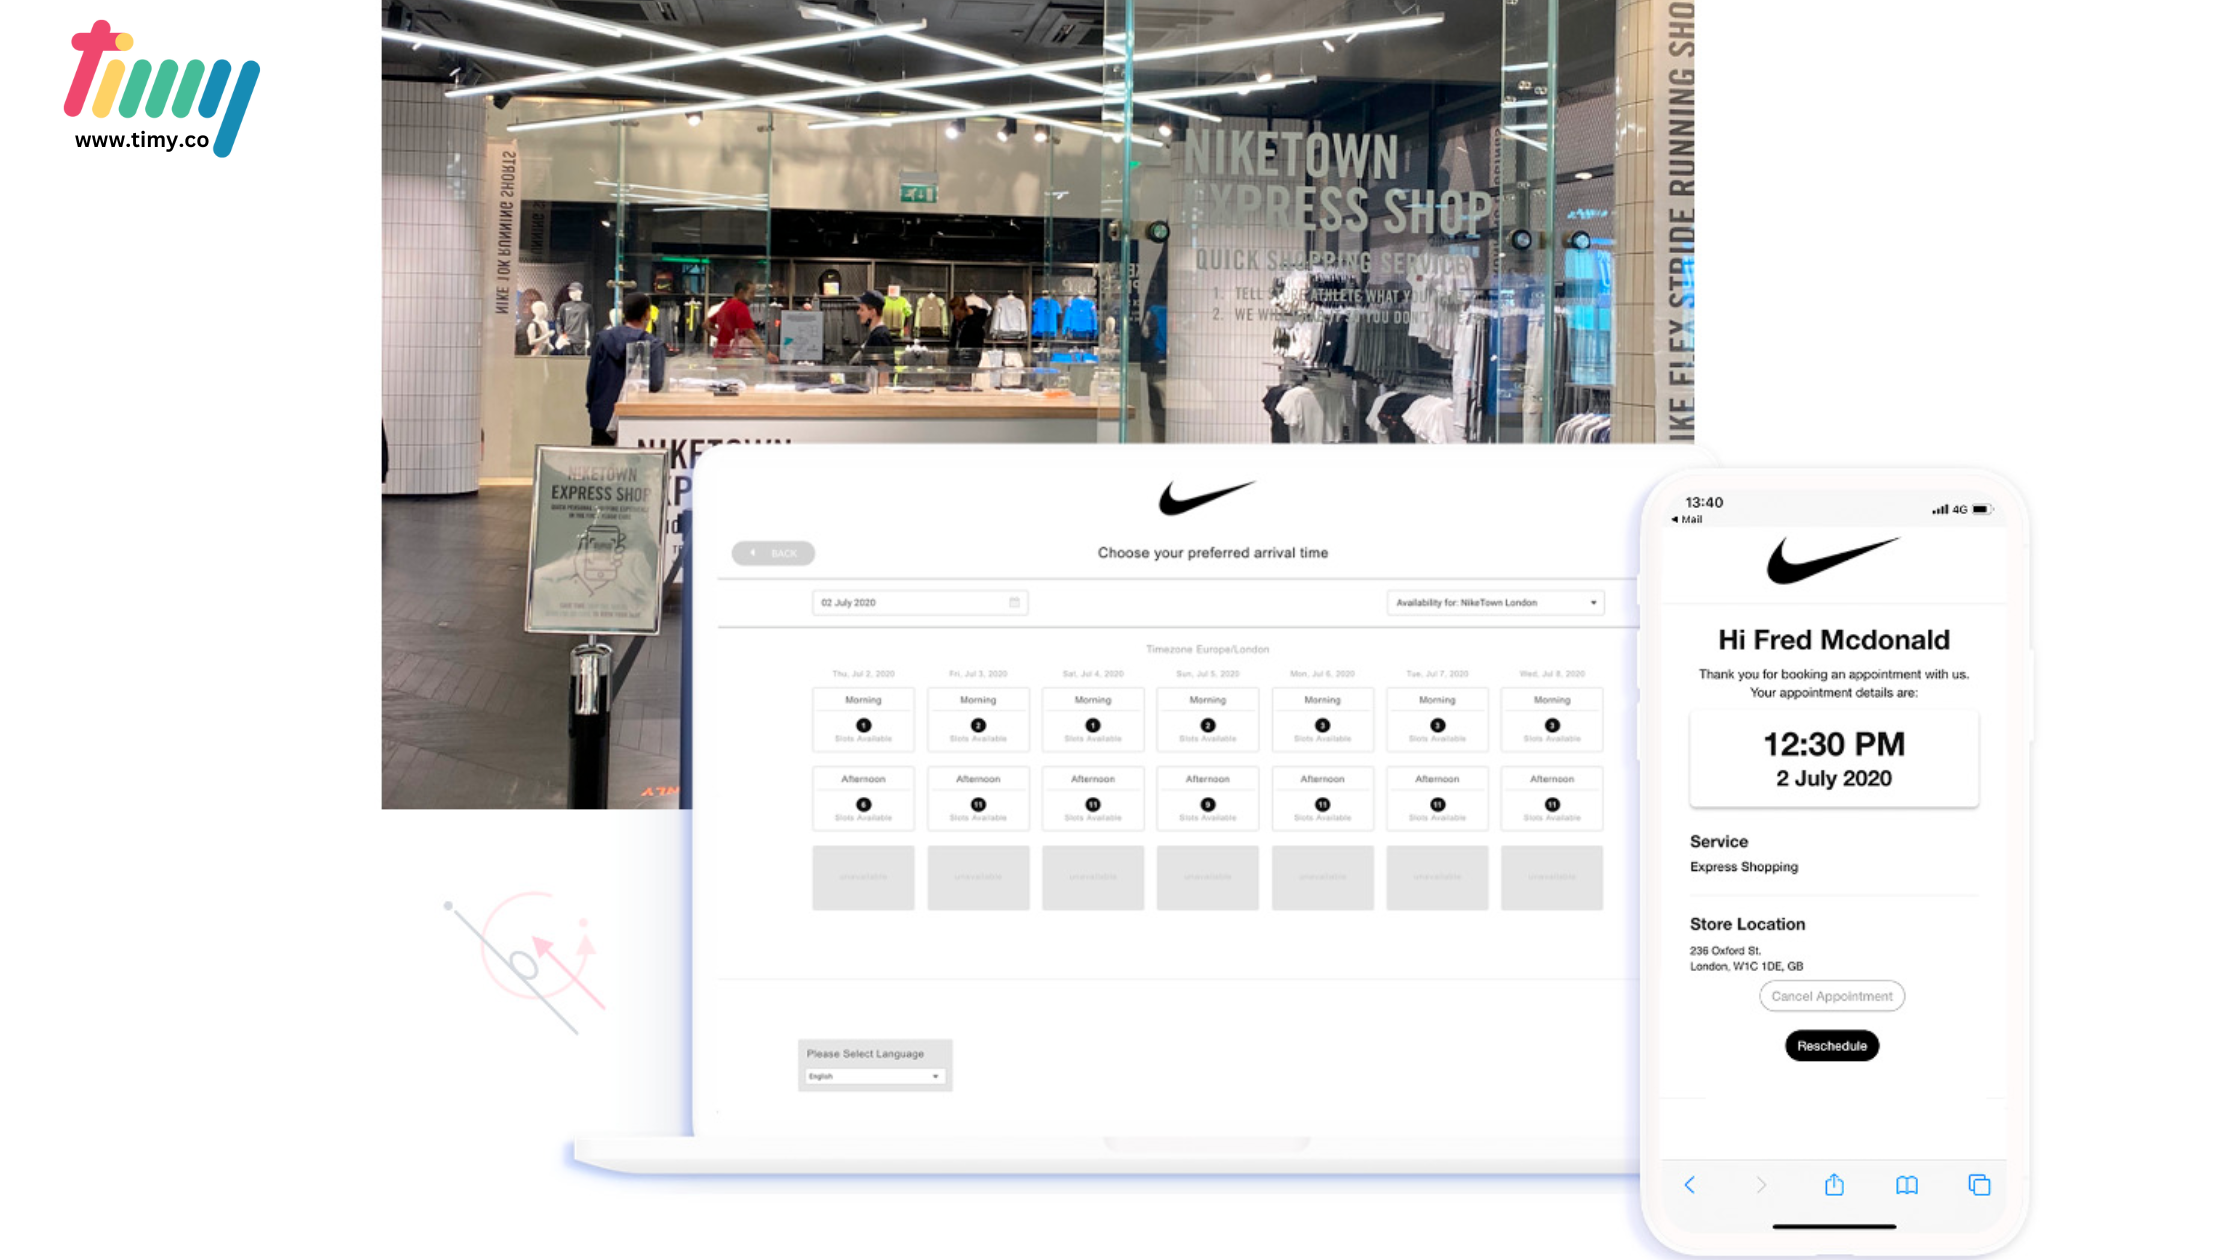 A case study about how the brand Nike managed to surpass the Covid-19 using online appointment scheduling software